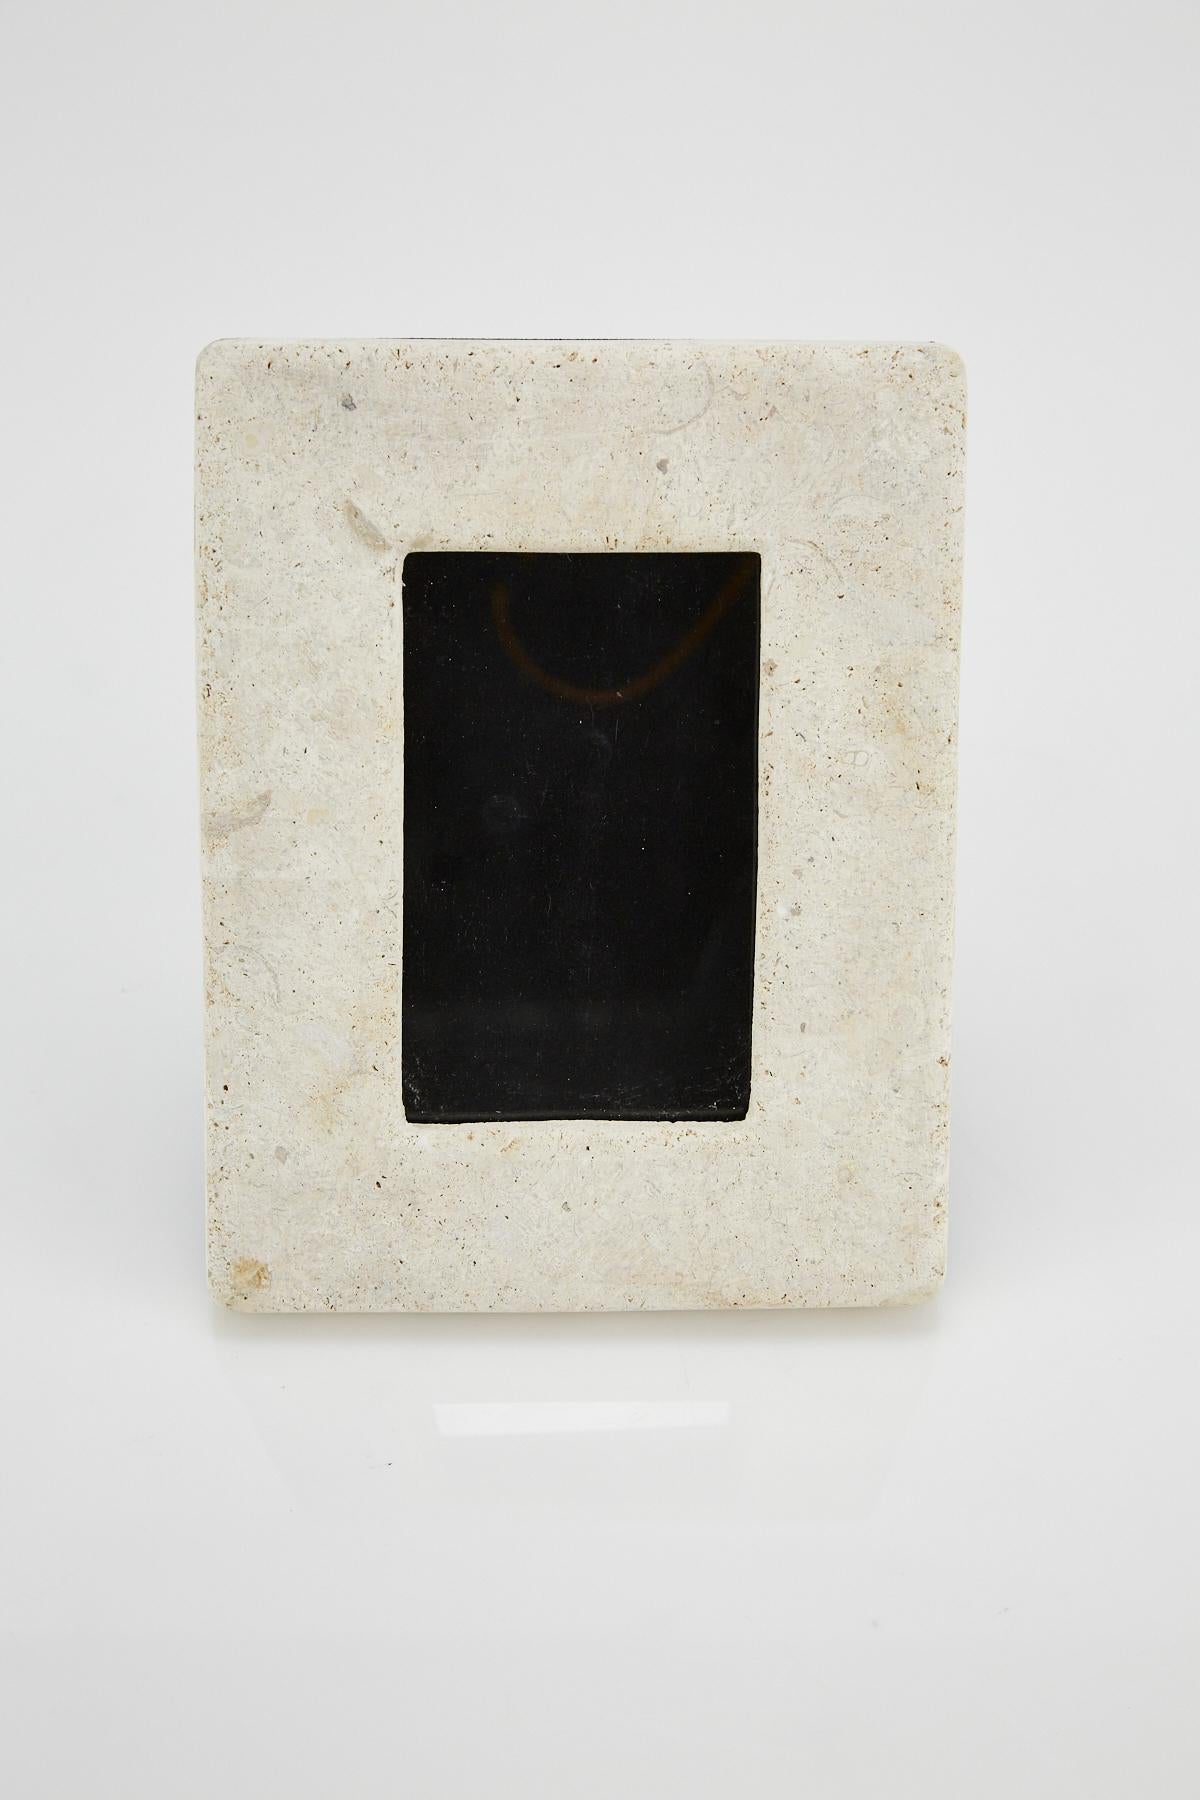 Rectangular 3 x 5 in. picture frame in tessellated matte Mactan stone with black felt back. Opening for picture measures 5 3/8 x 3 1/4 in., frame overall measures 9 x 7 in.

All furnishings are made from 100% natural Fossil Stone or Seashell inlay,